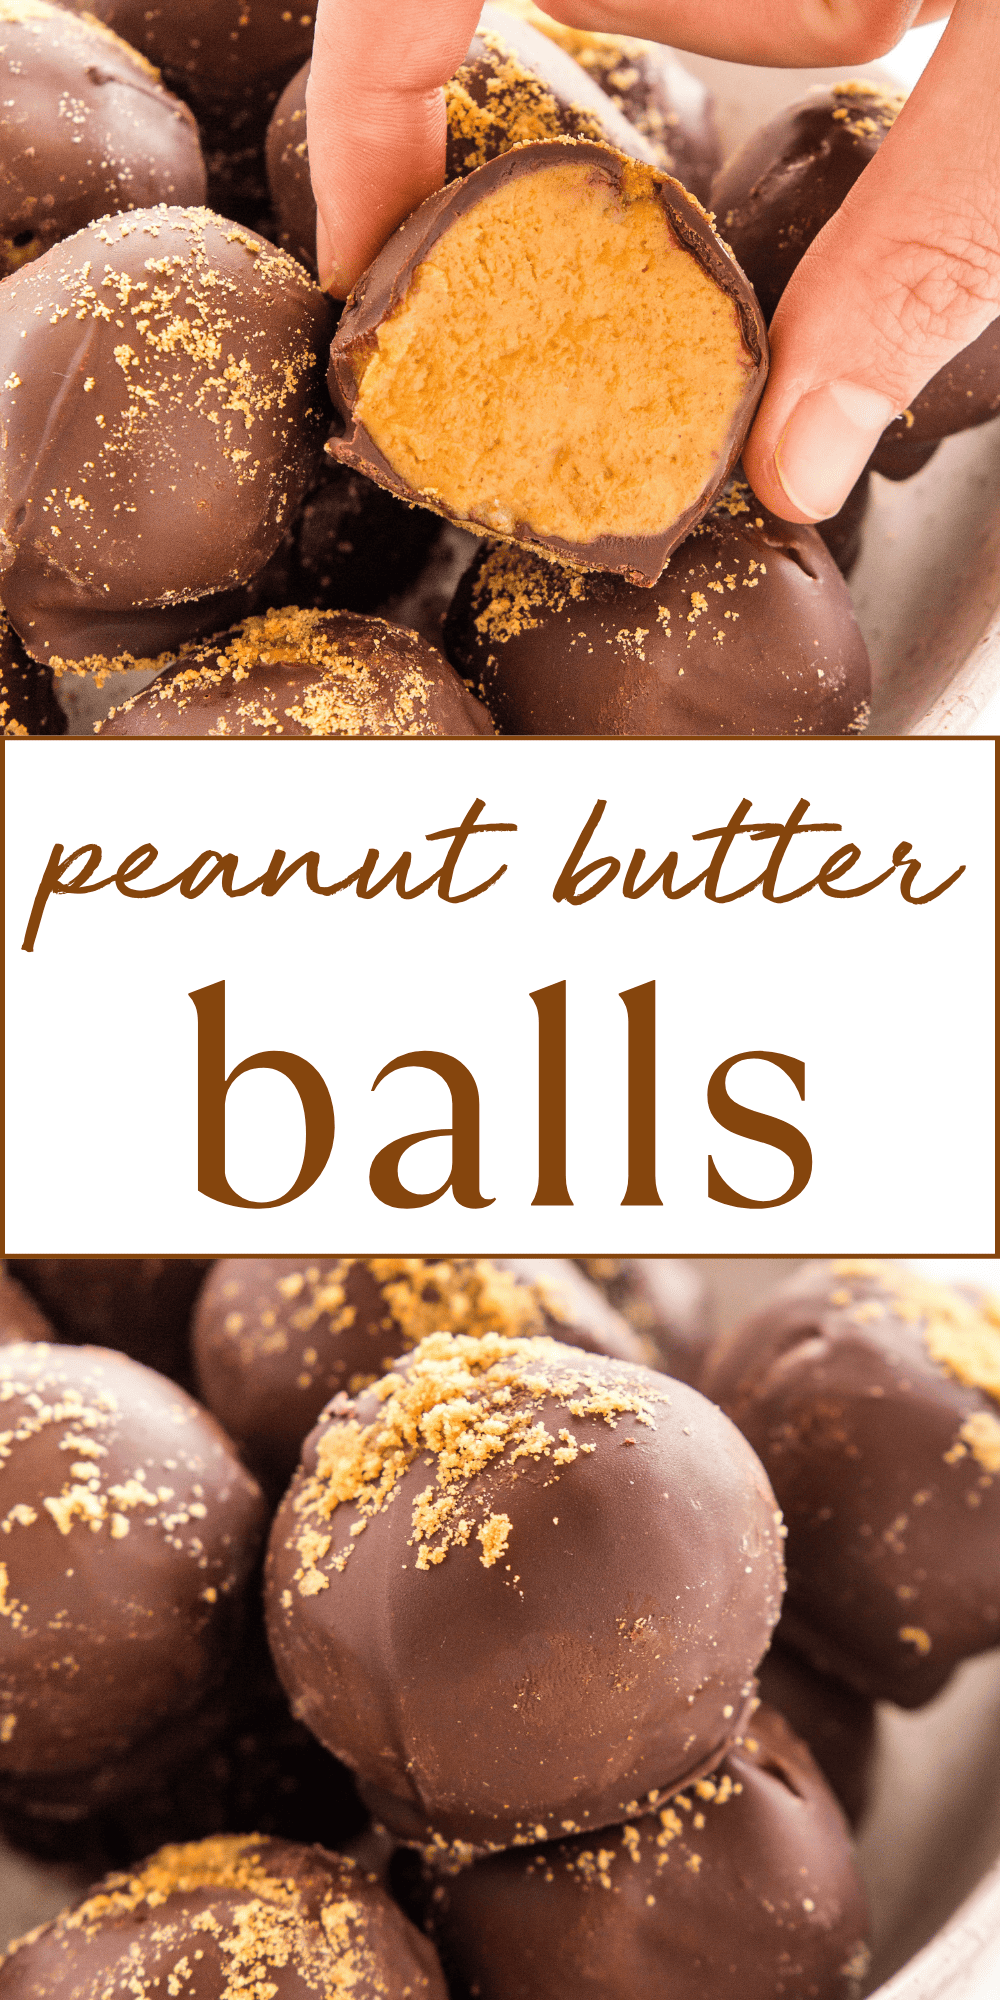 This Peanut Butter Balls recipe is an easy classic holiday treat recipe made with a sweet & creamy peanut butter filling and dipped in melted chocolate! Recipe from thebusybaker.ca! #peanutbutterballs #buckeyes #christmas #christmastreat #holiday #holidaybaking #christmasbaking #nobake #easytreat #easydessert #christmascookies via @busybakerblog